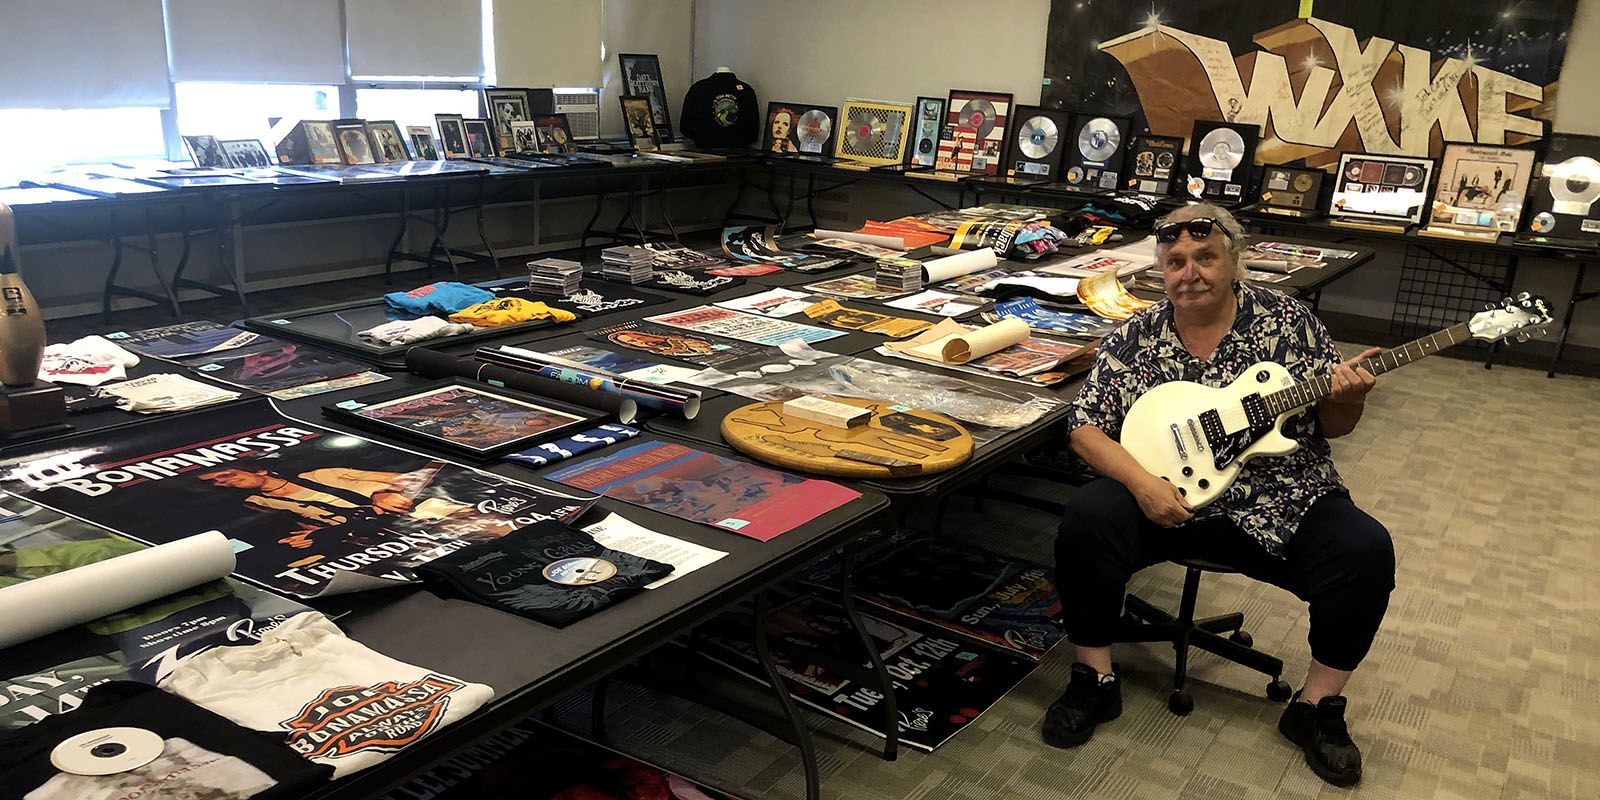 WXKE DJ Doc West will be auctioning off his rock memorabilia.